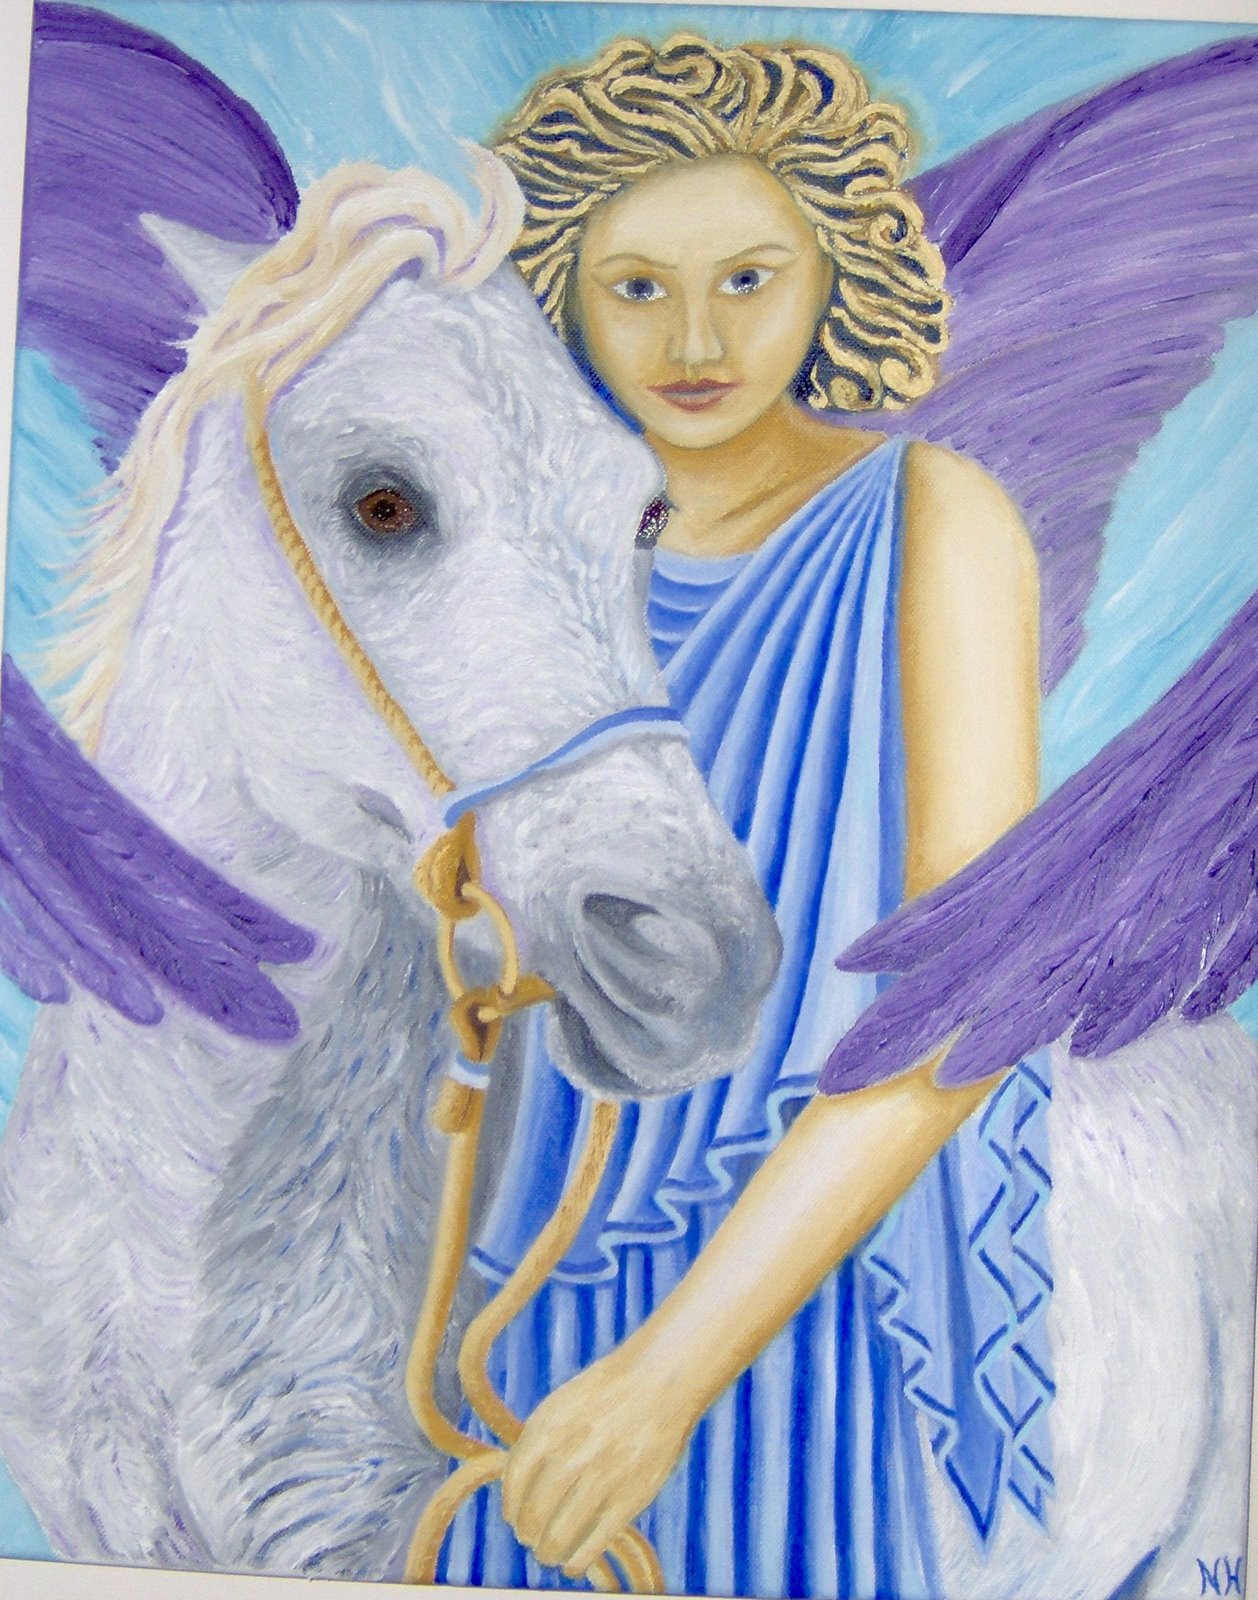 [Pegasus+and+Cassiopeia,+Art+and++Poetry+blog.JPG]